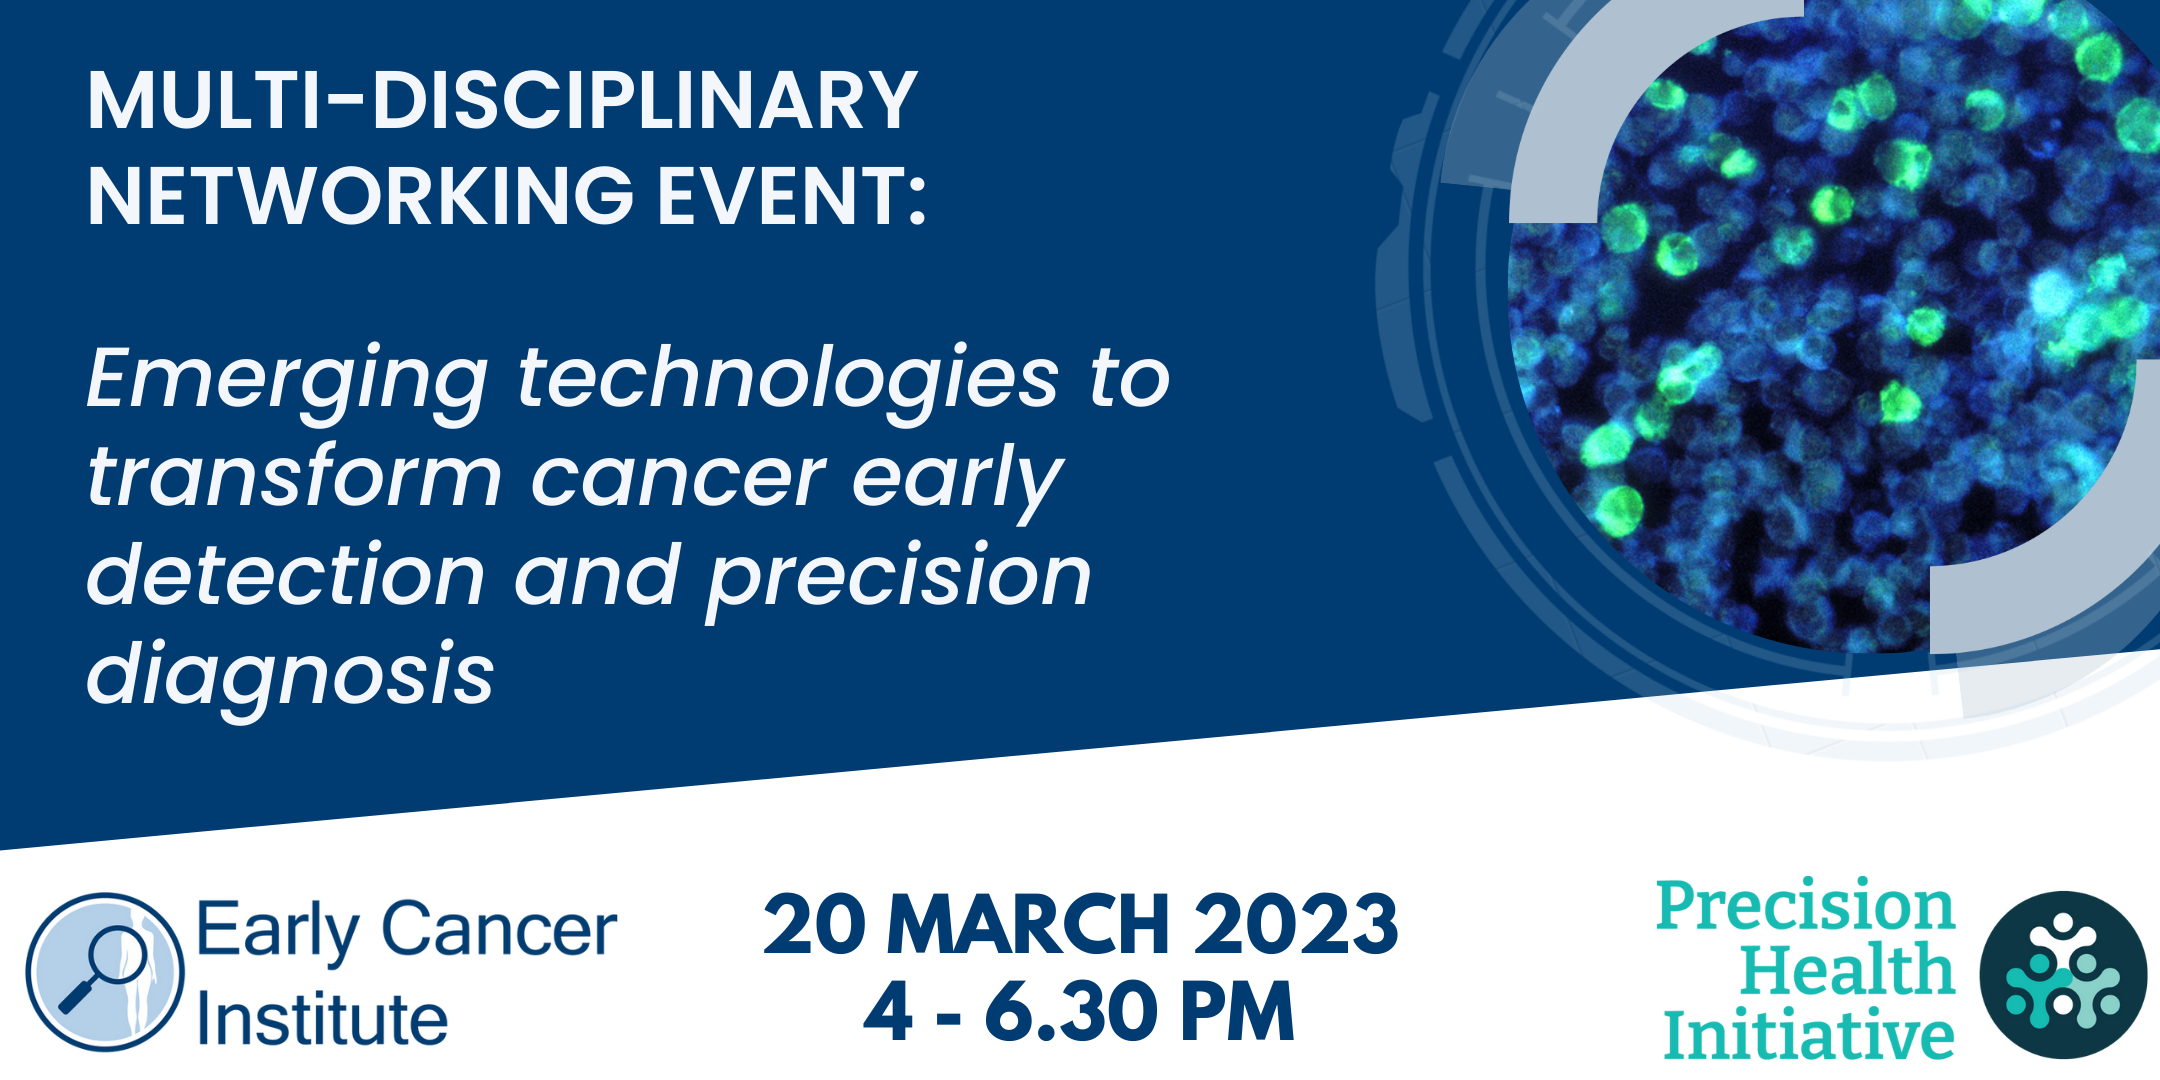 Image to advertise a networking event: Emerging technology to transform cancer early detection